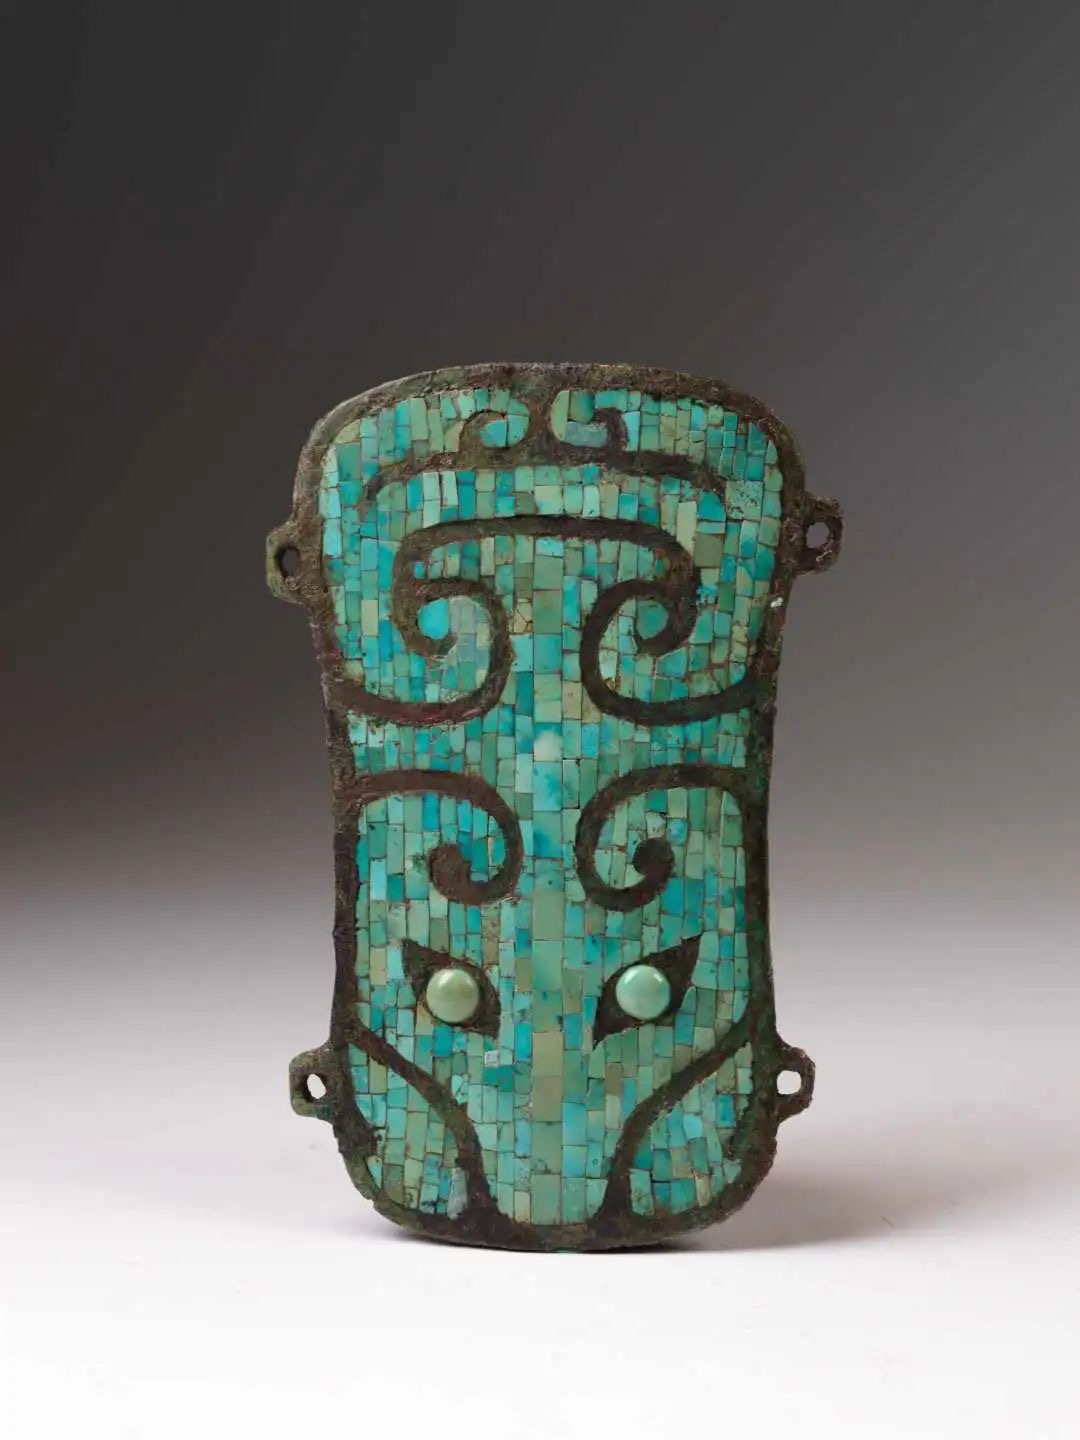 Inlaid turquoise animal face plate decoration Exhibition period is 7.30-8.30 Late Xia Dynasty (18th century BC - 16th century BC) height 16.5 cm, width 11.0 cm Unearthed VI M11 of Erlitou Site in 1984 Collection of Erlitou Xiadu Site Museum